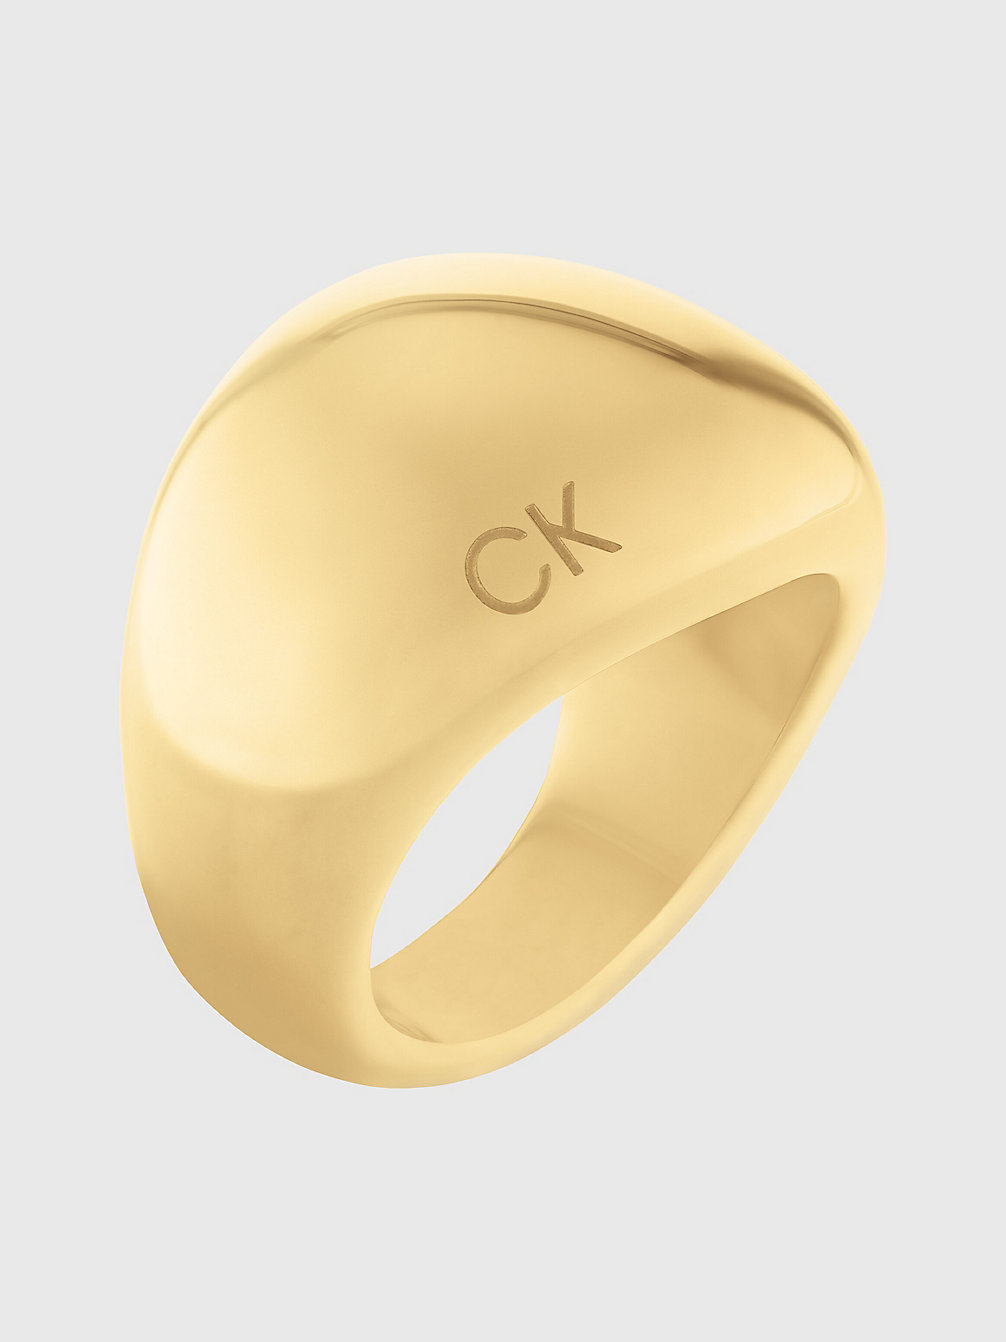 GOLD Ring - Playful Organic Shapes undefined women Calvin Klein